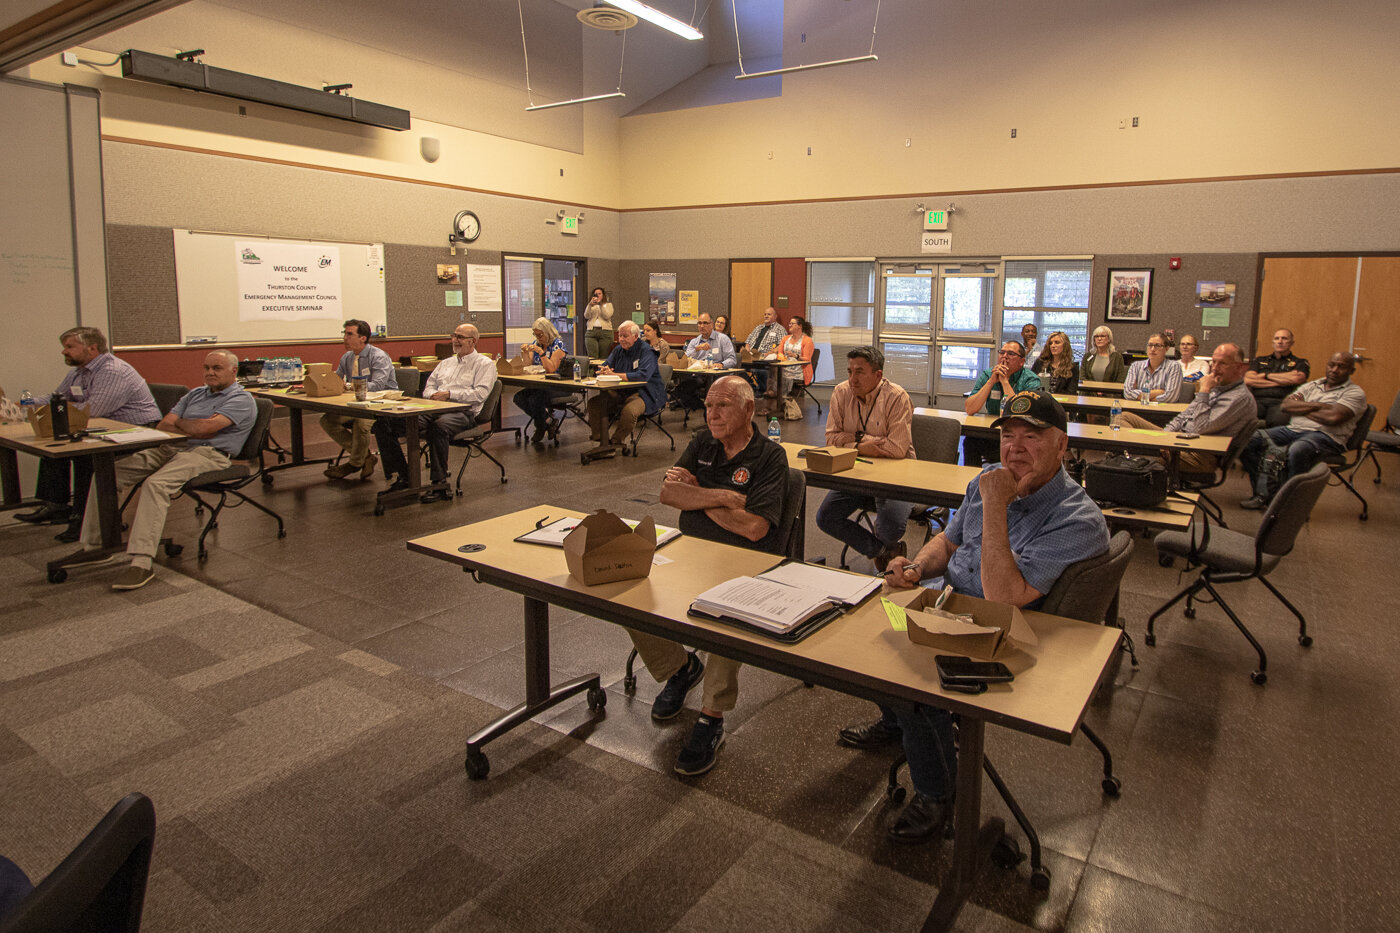 County and city officials from throughout Thurston County gathered Monday evening at the Thurston County Emergency Management building for an executive seminar on the upcoming wildfire season.